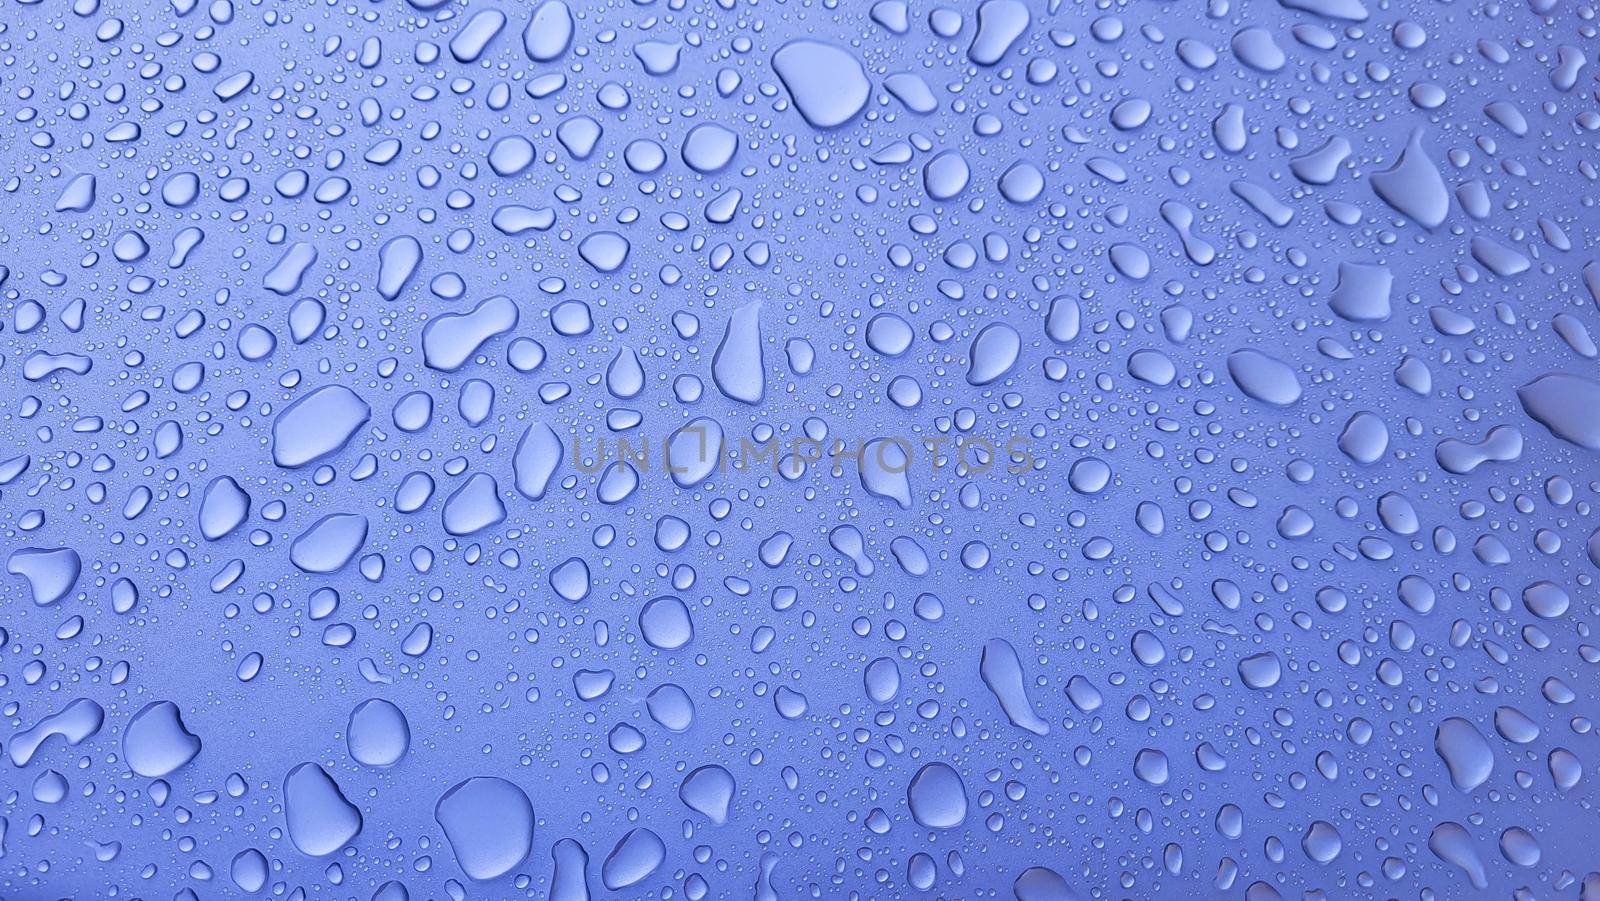 A drop of water on the hood of the car. Water balls after rain or car wash on the surface of purple paint by lapushka62